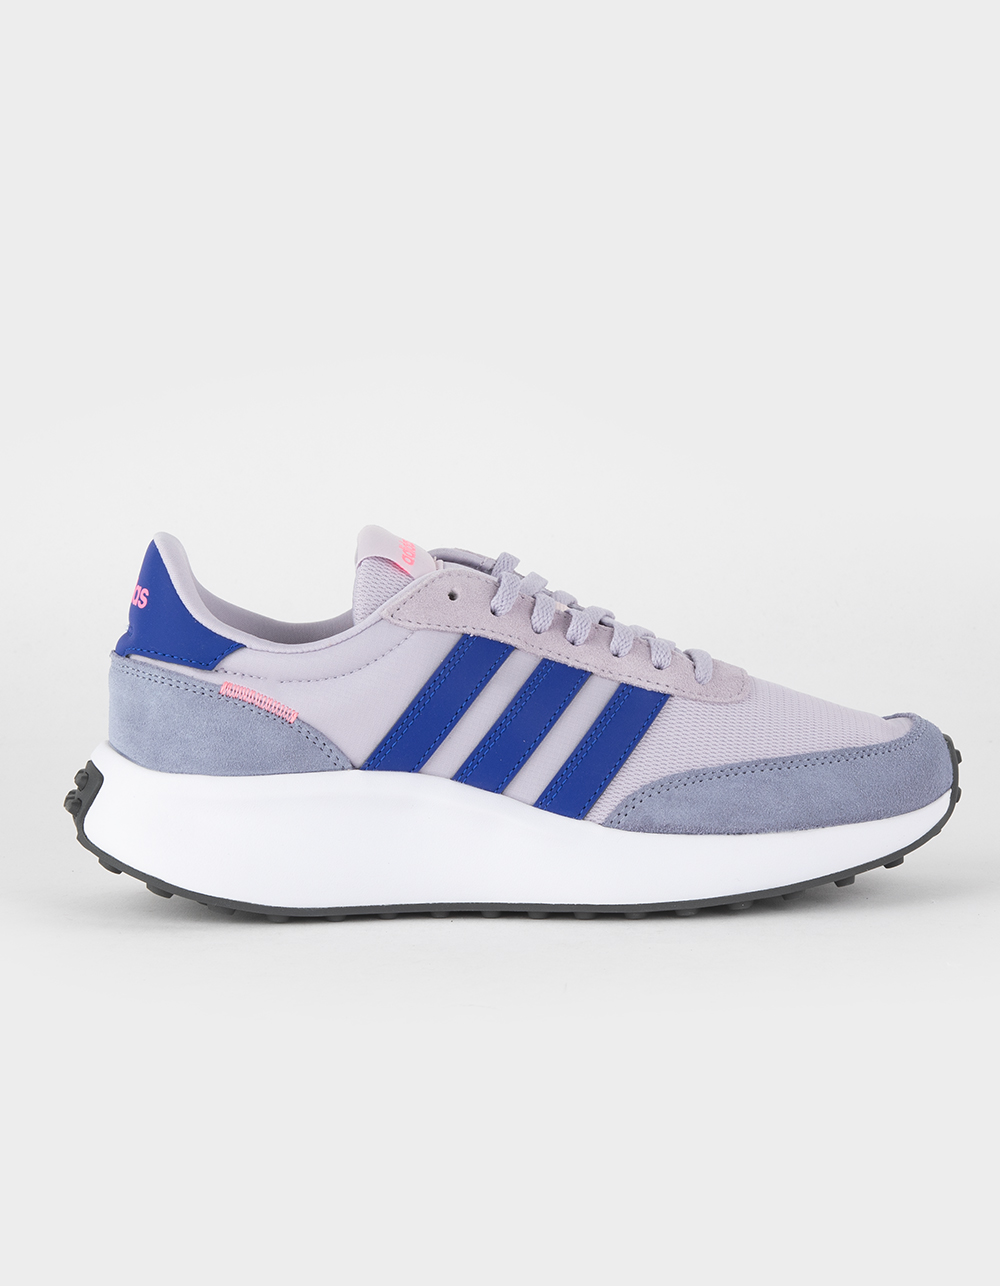 ADIDAS Run 70s Shoes - VIOLET Tillys